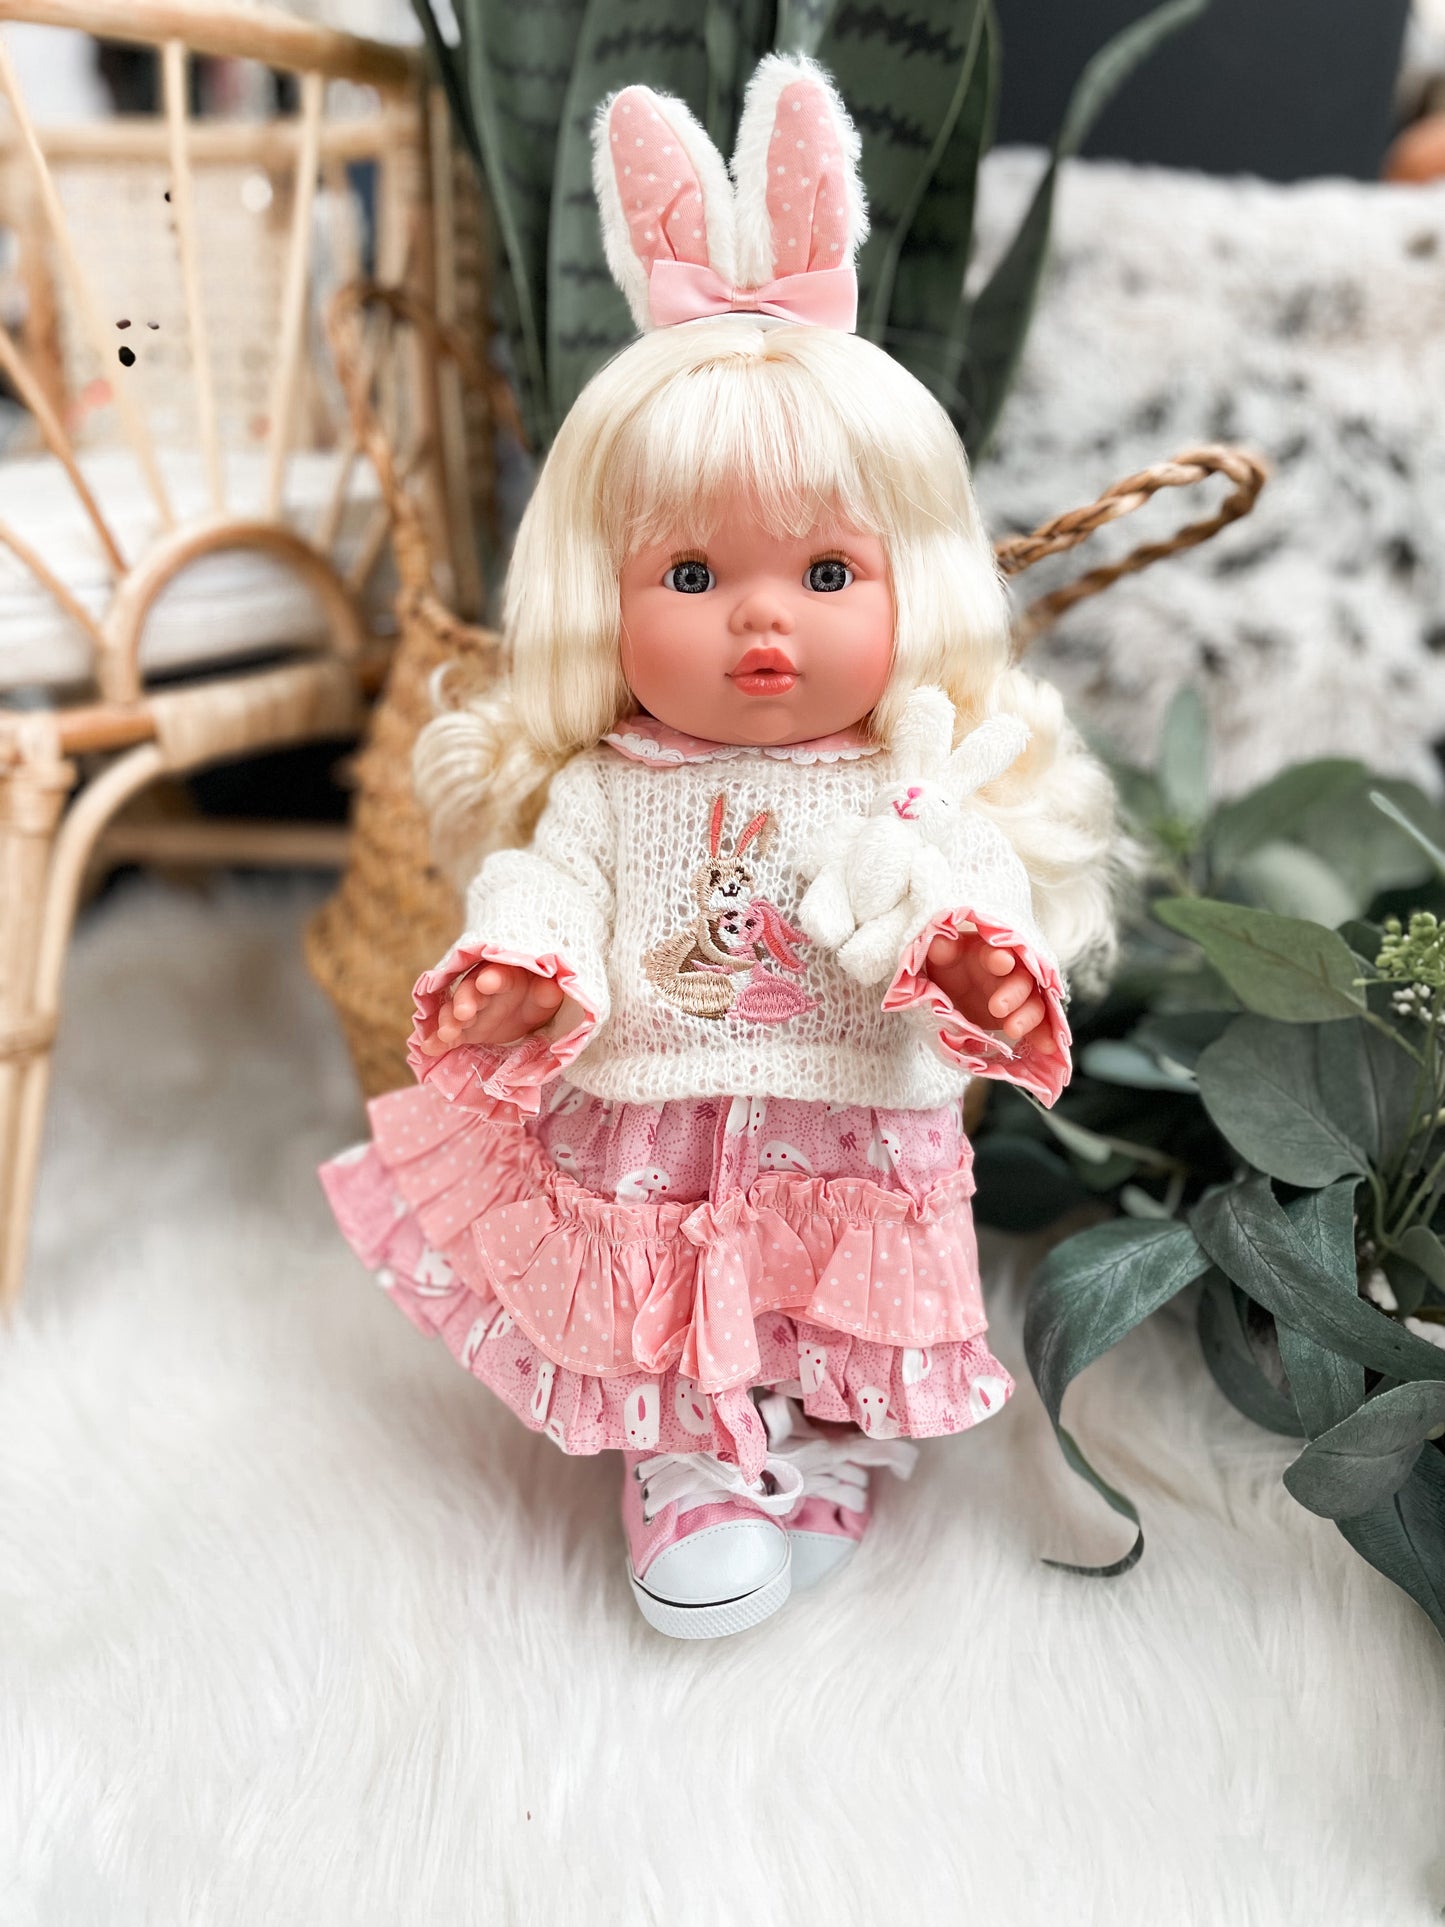 Sage With Easter Bunny Outfit- Mini Colettos Girl Doll - OOAK